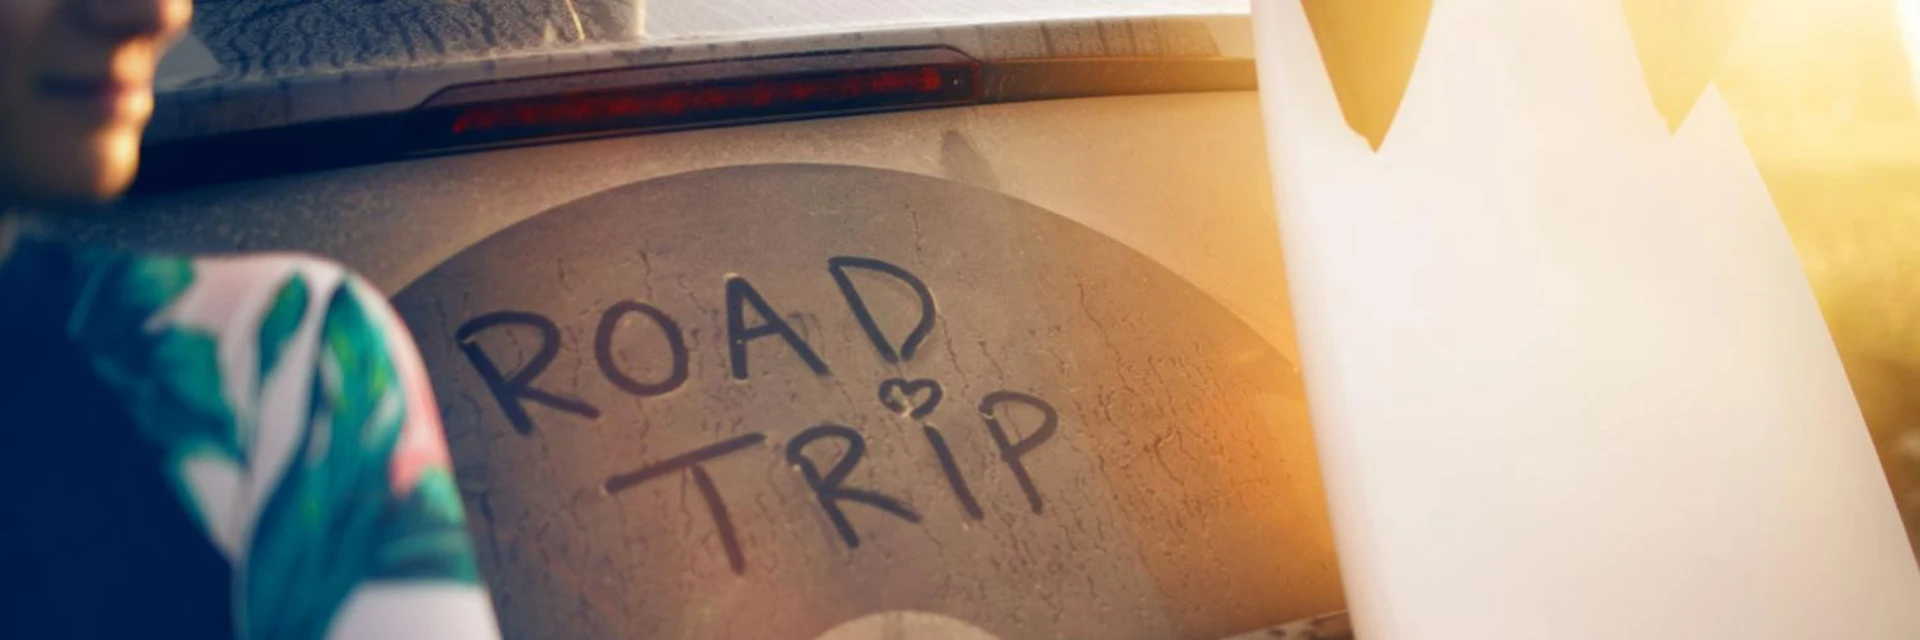 HOW TO TAKE A SAFE, AFFORDABLE AND MEMORABLE ROAD TRIP